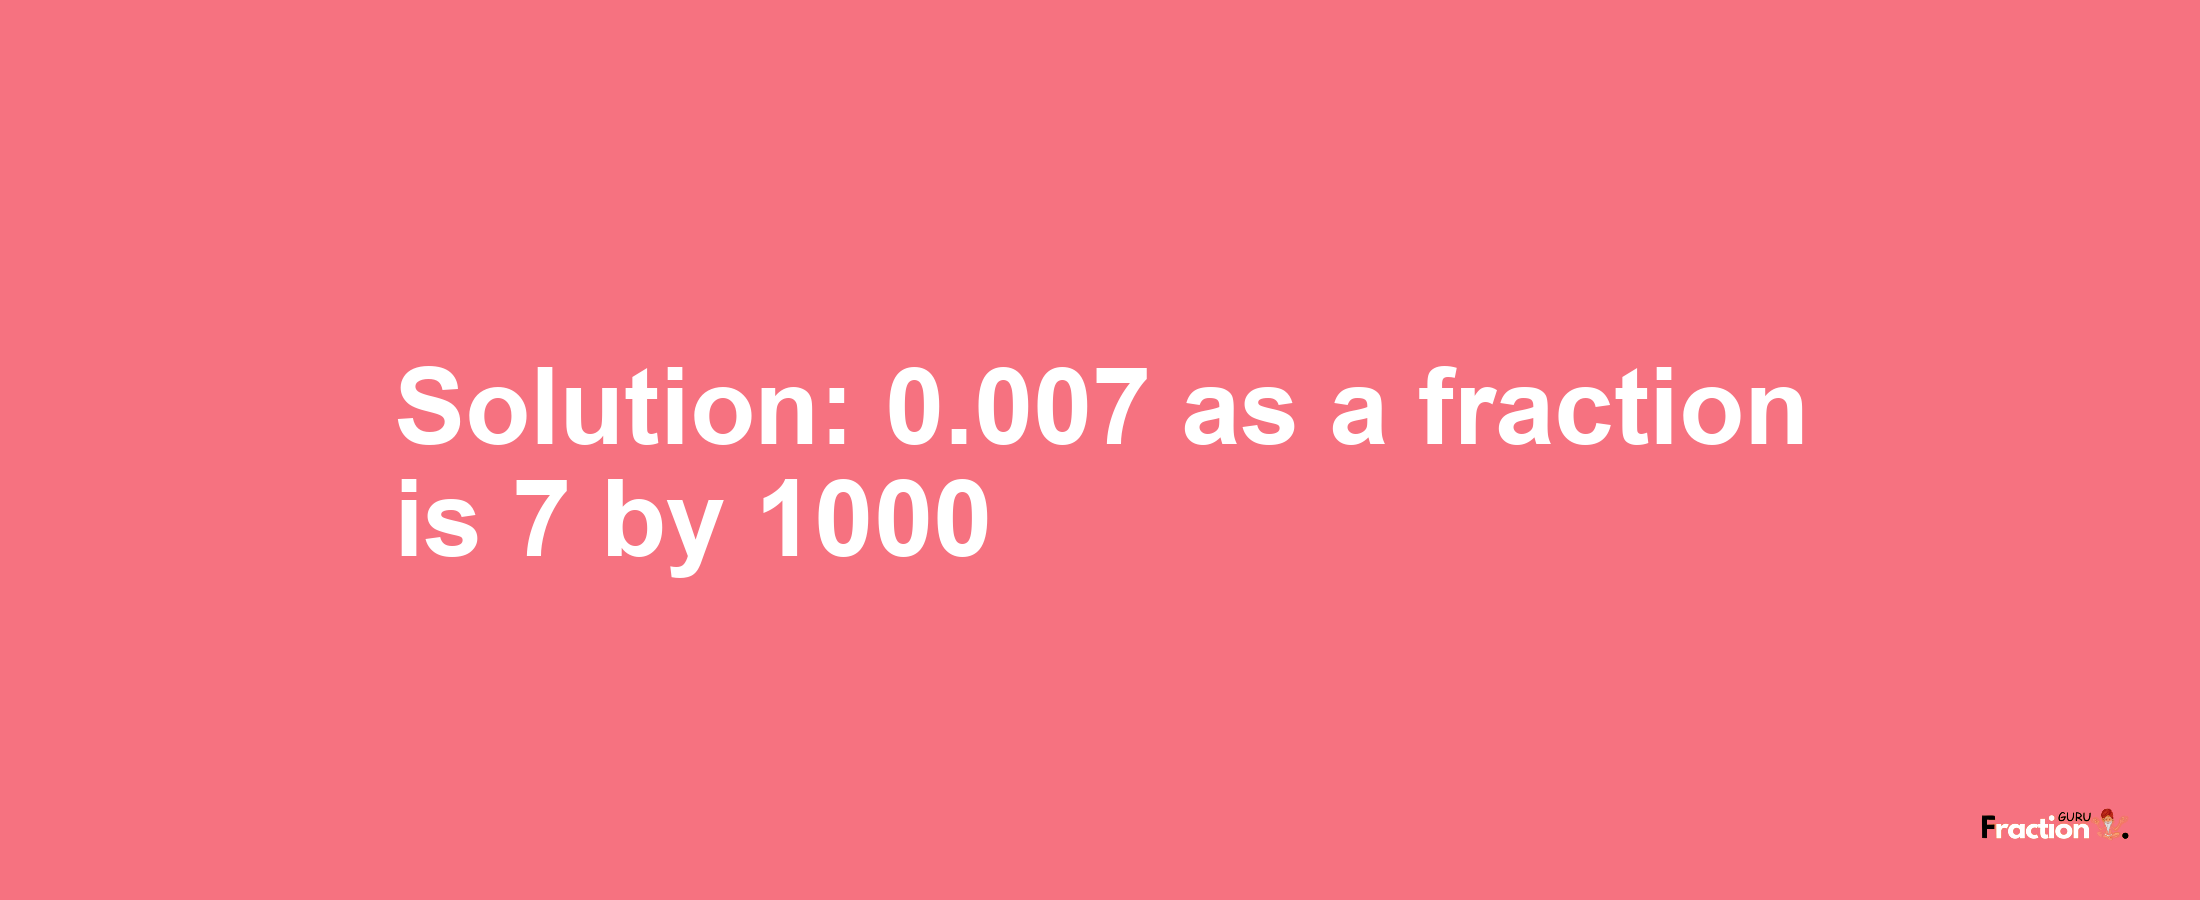 Solution:0.007 as a fraction is 7/1000